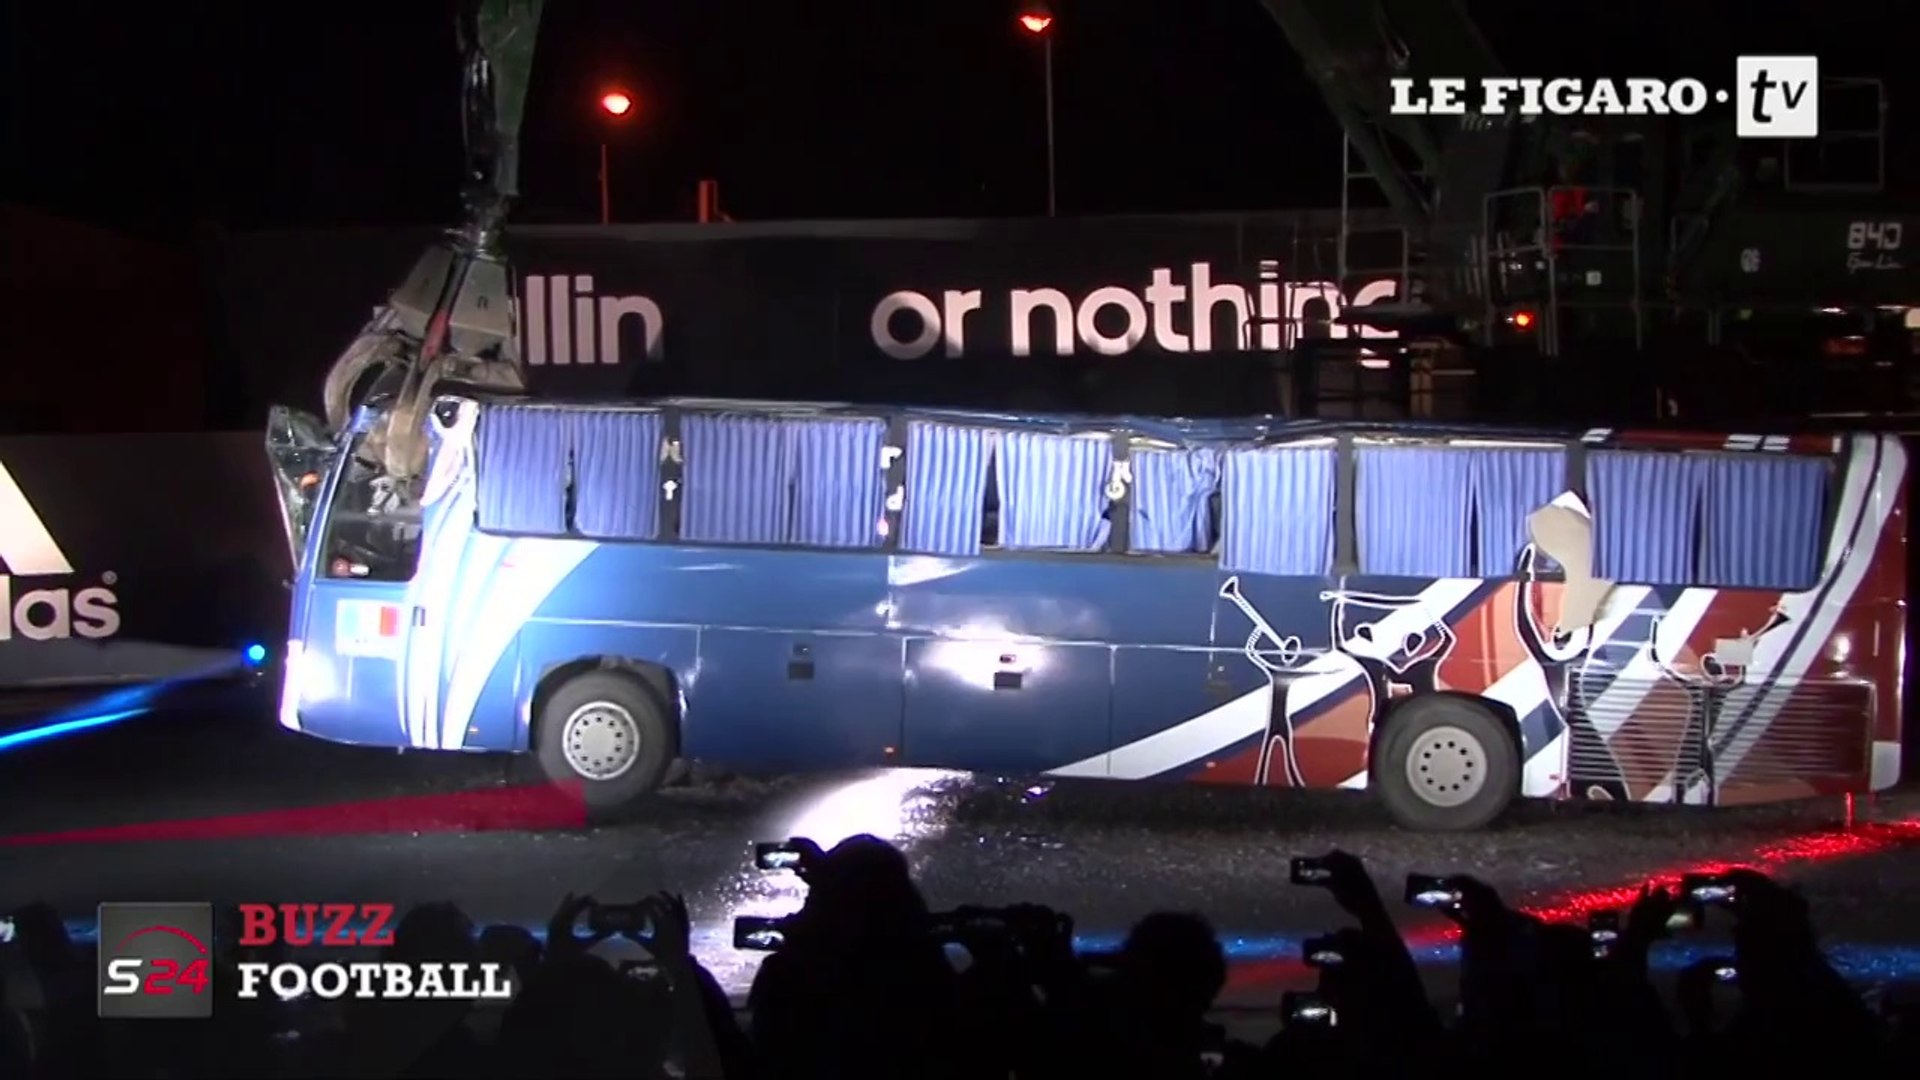 France soccer team old bus destroyed by ADIDAS! - Vidéo Dailymotion